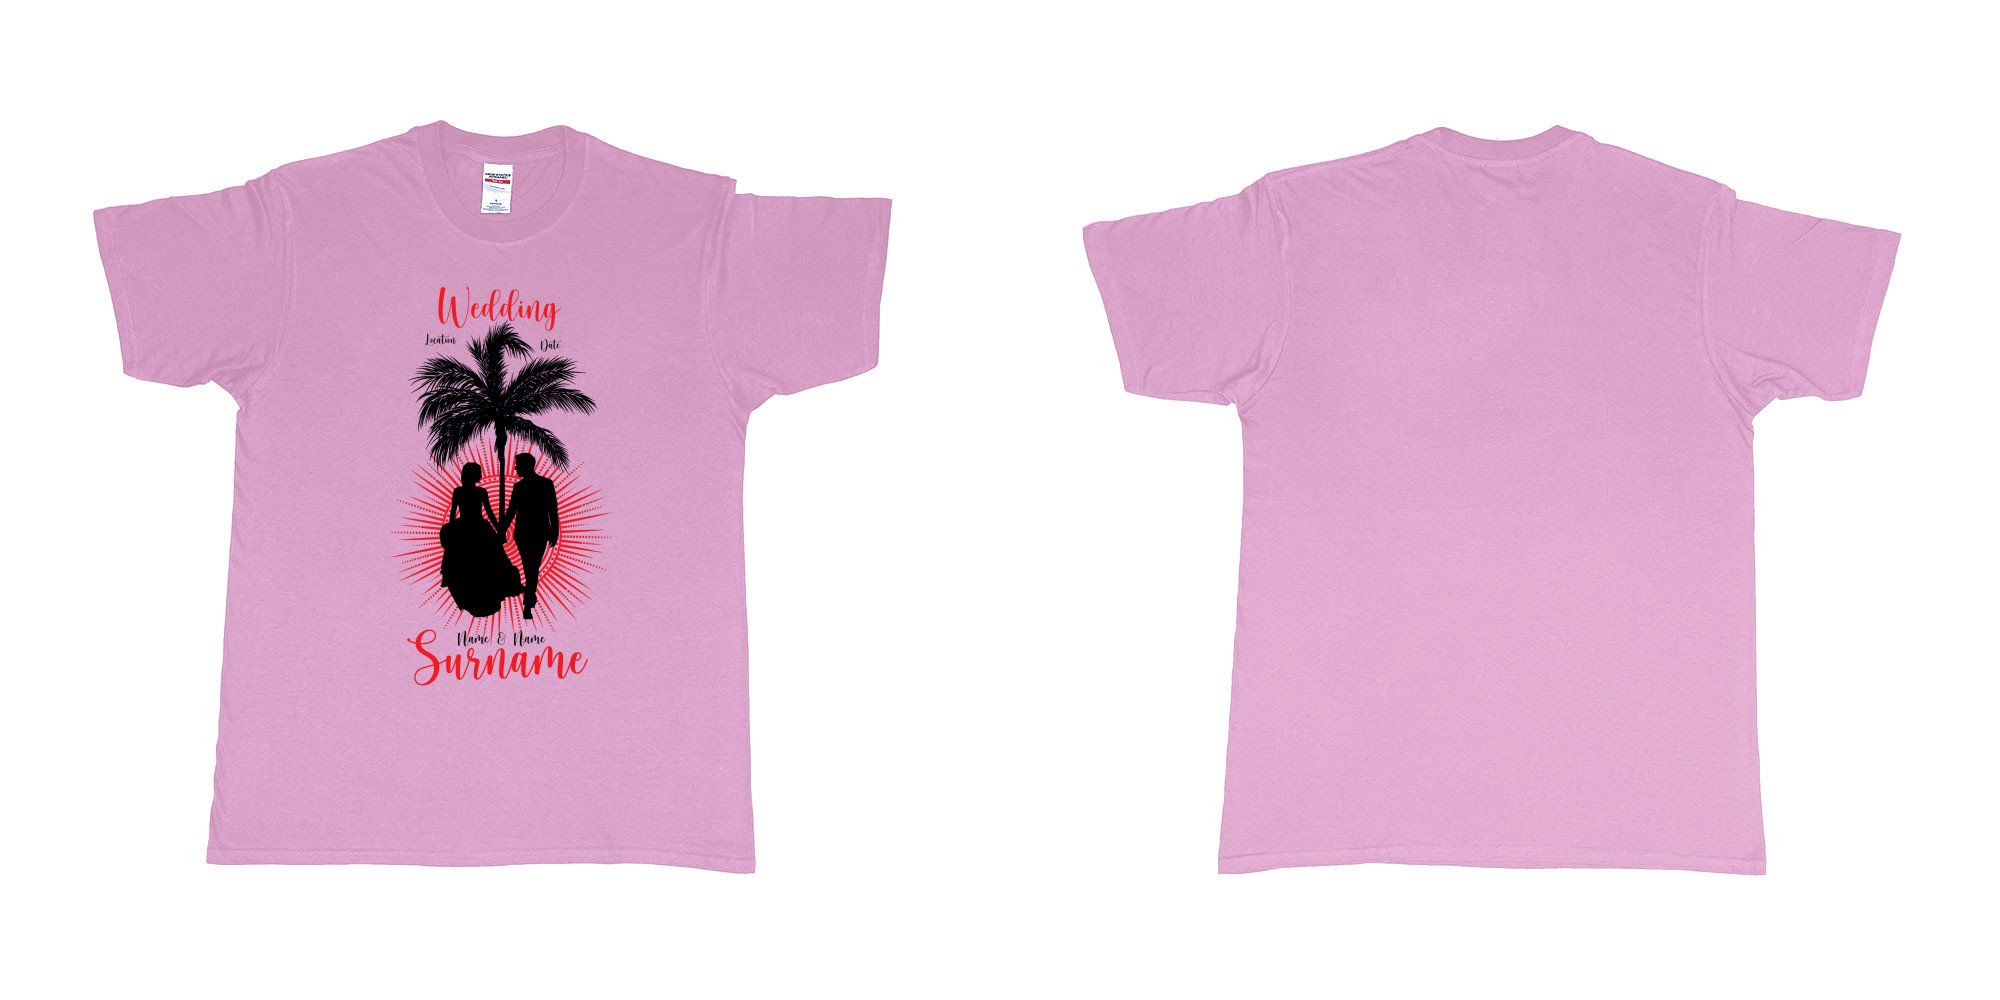 Custom tshirt design wedding palm sun bali in fabric color light-pink choice your own text made in Bali by The Pirate Way